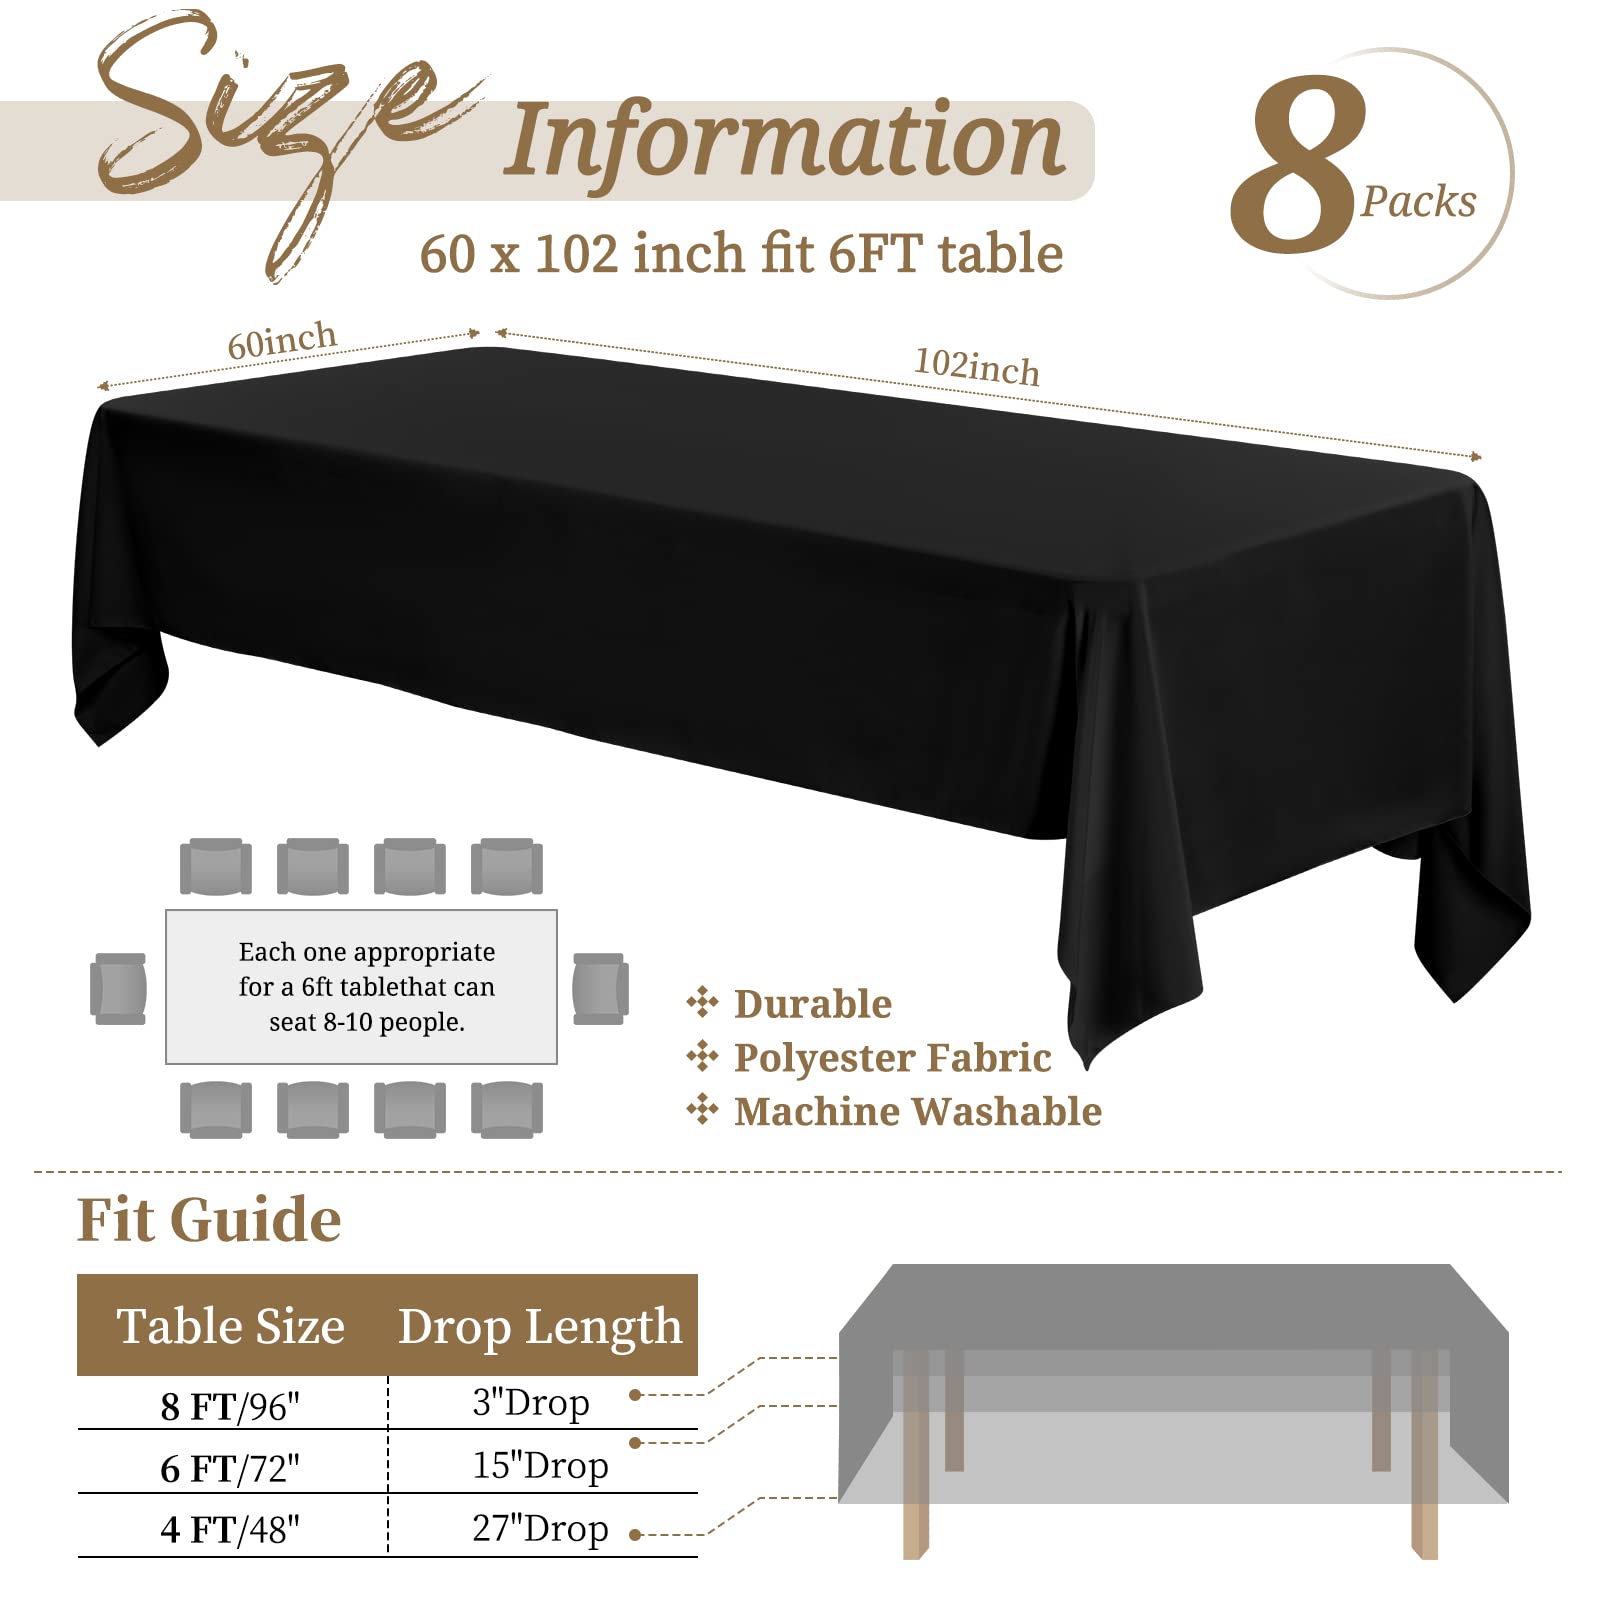 Showgeous 8 Pack Black Tablecloth 60 x 102 Inch, Rectangle Table Cloth for 6 Foot Table, Wrinkle Resistant Washable Polyester Table Cover for Wedding Dining Table Buffet Parties and Camping